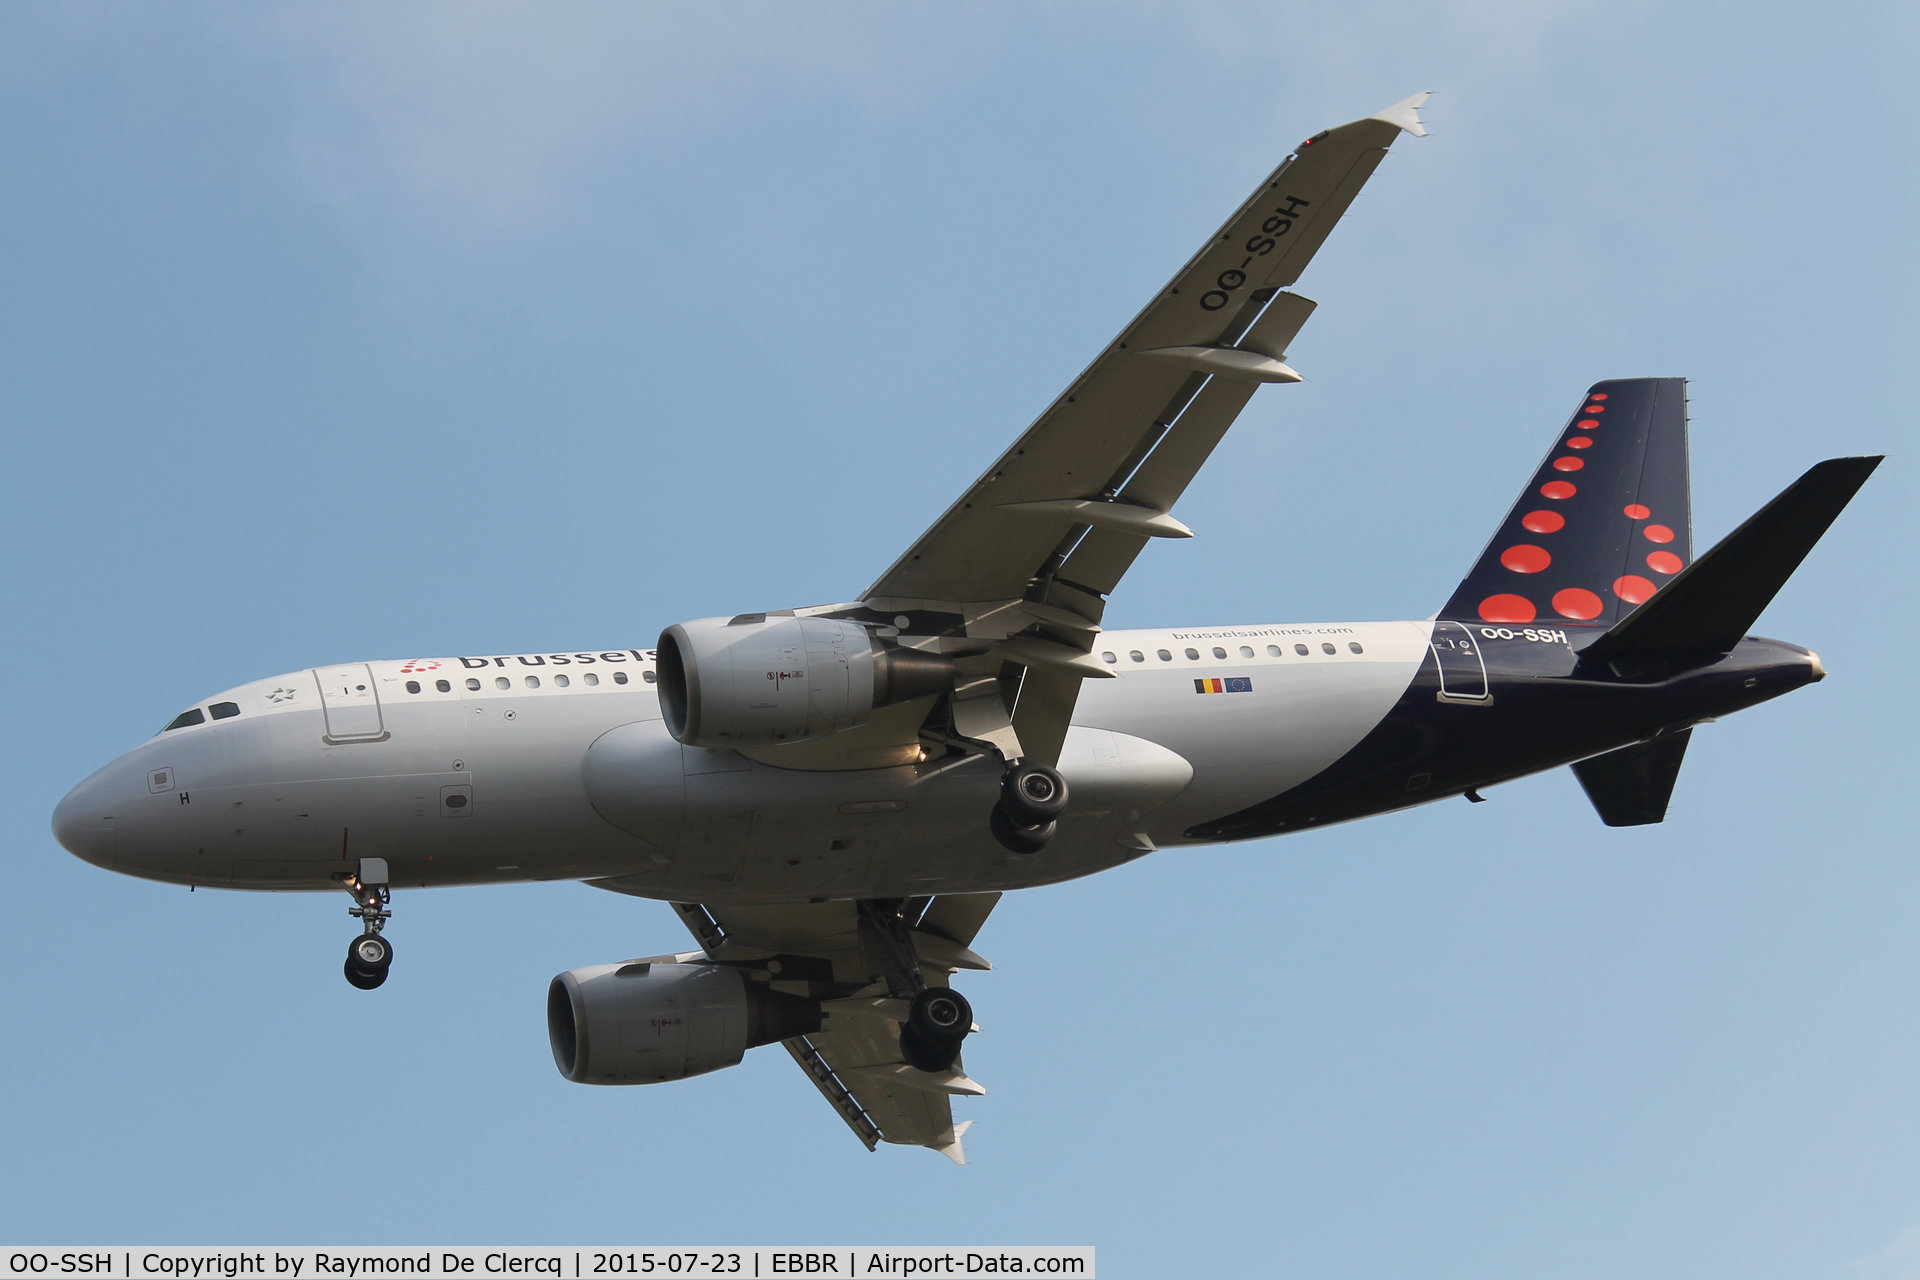 OO-SSH, 2006 Airbus A319-112 C/N 2925, Landing at Brussels airport rwy 25L.